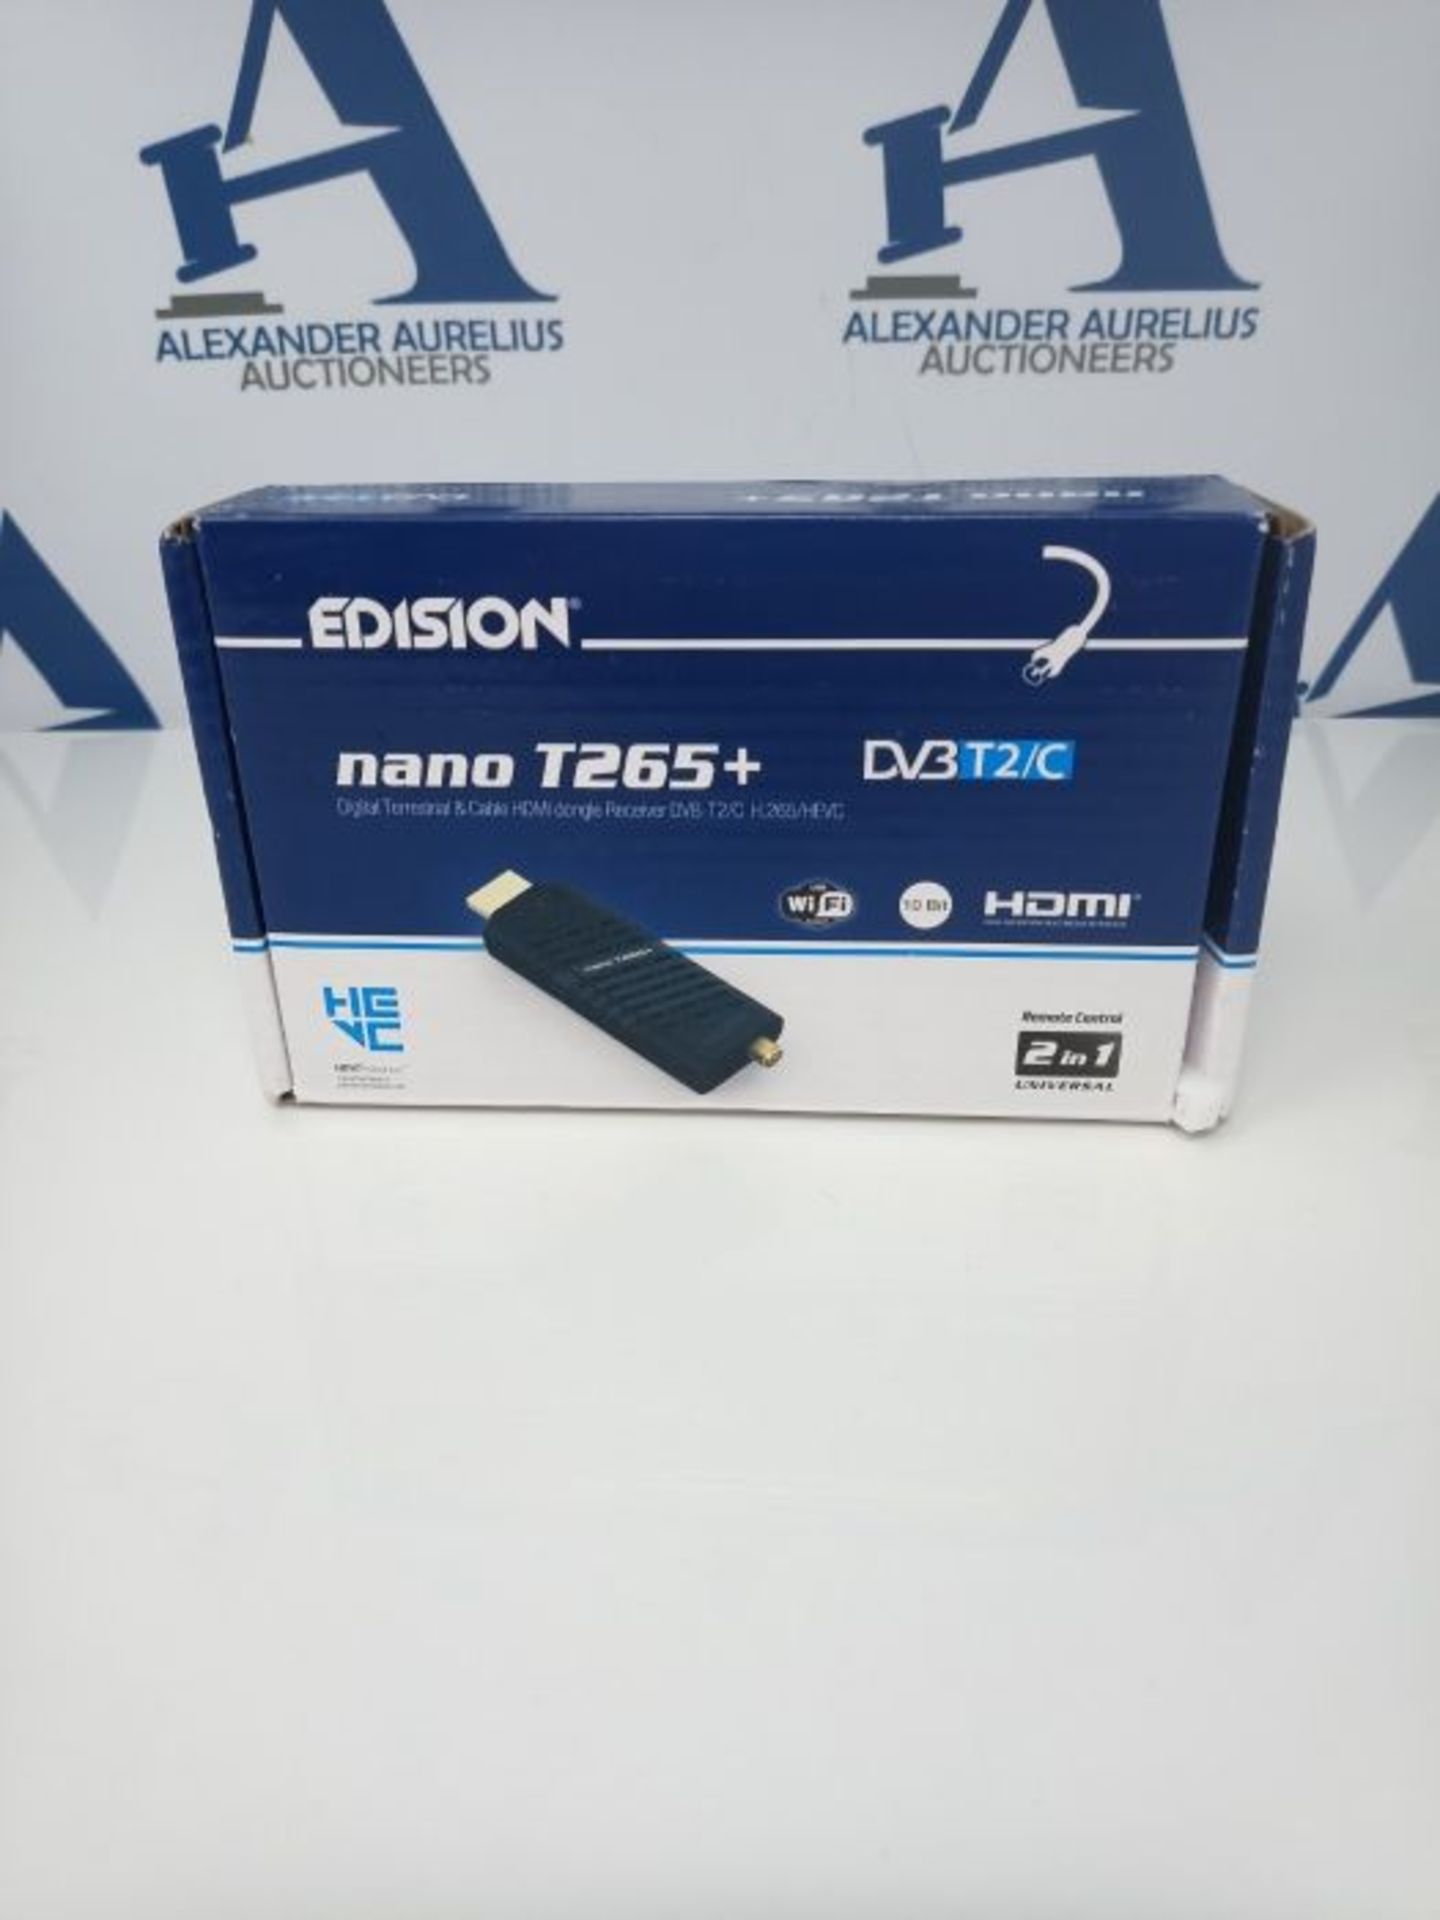 Edision NANO T265+ Terrestrial and Cable HDMI dongle Receiver, DVB-T2/C, H265 HEVC, FT - Image 2 of 3